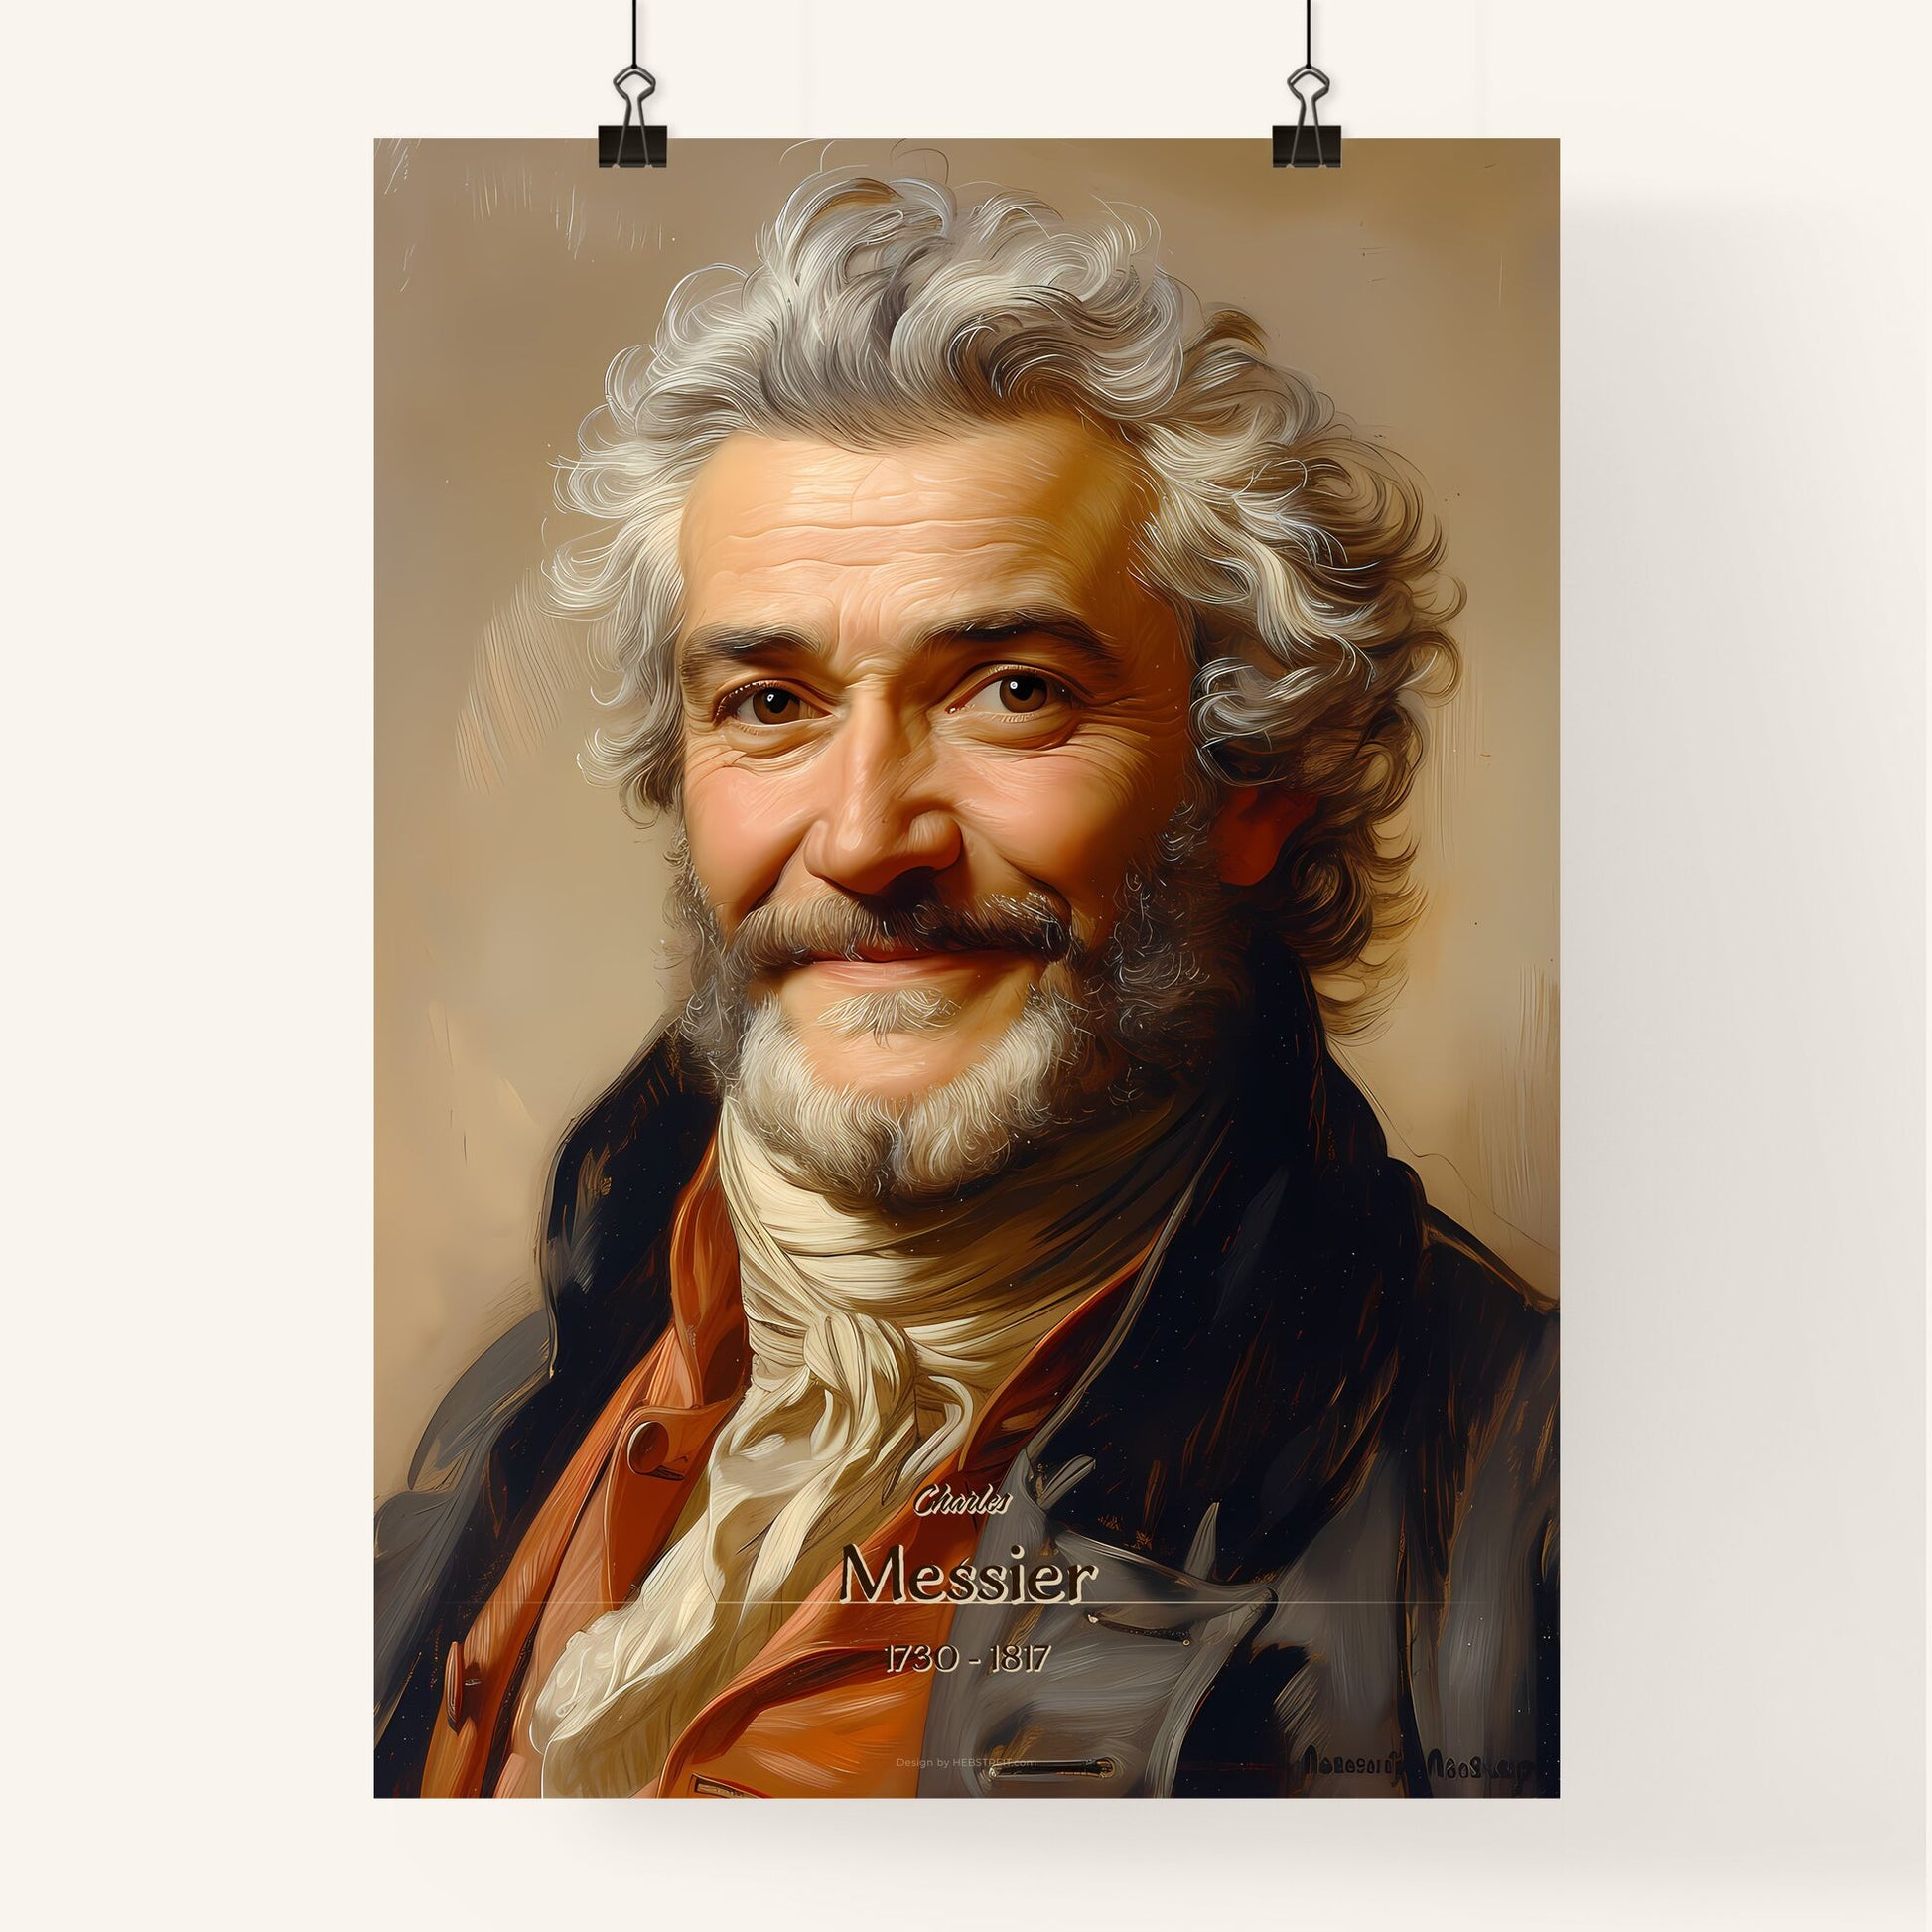 Charles, Messier, 1730 - 1817, A Poster of a man with white hair and beard Default Title